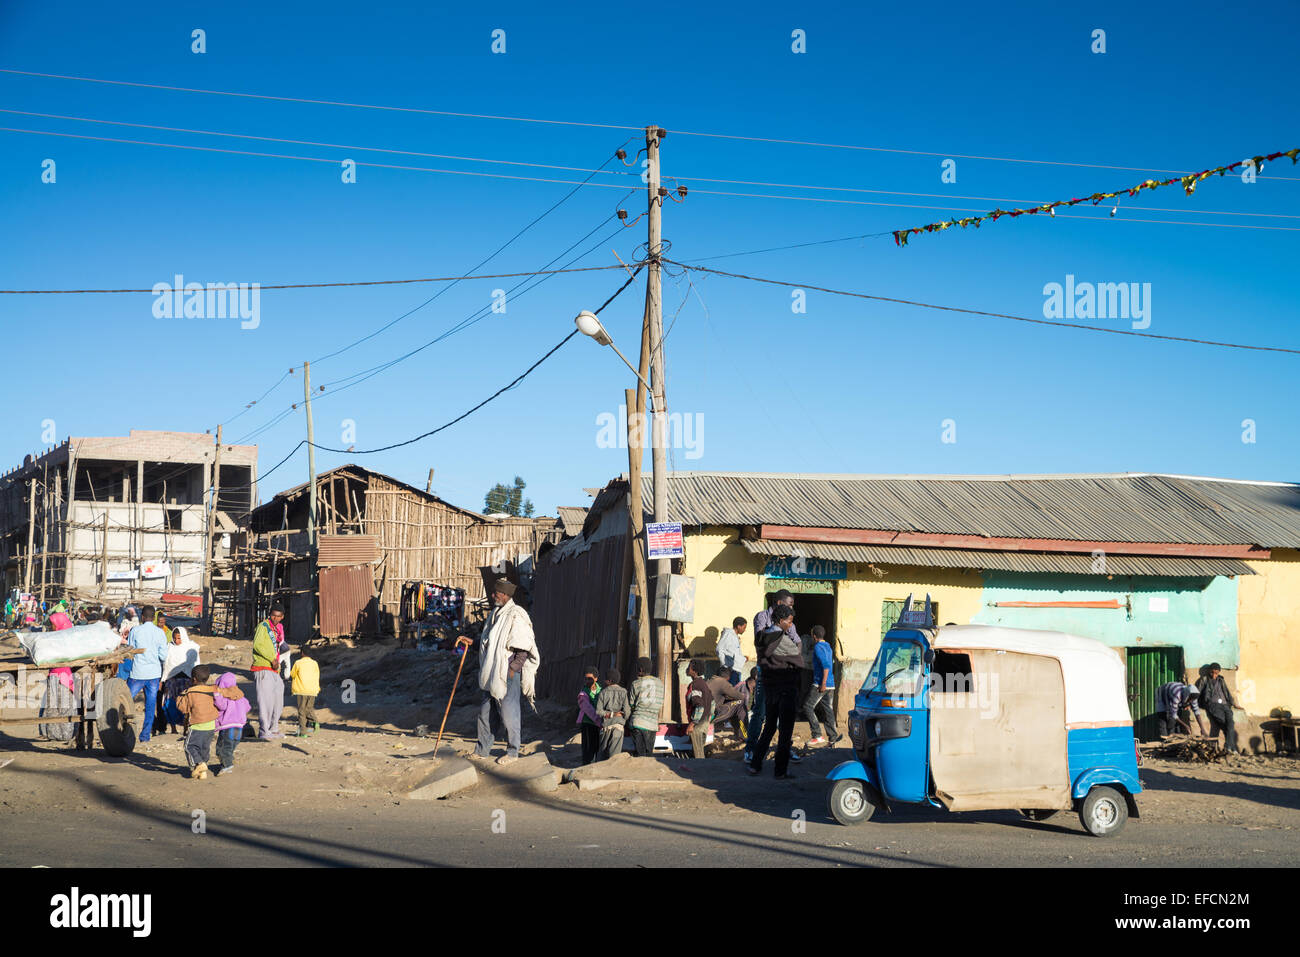 street scene at the town of Debark on the edge of the Simien Mountain National Park in Ethiopia, Africa. Stock Photo